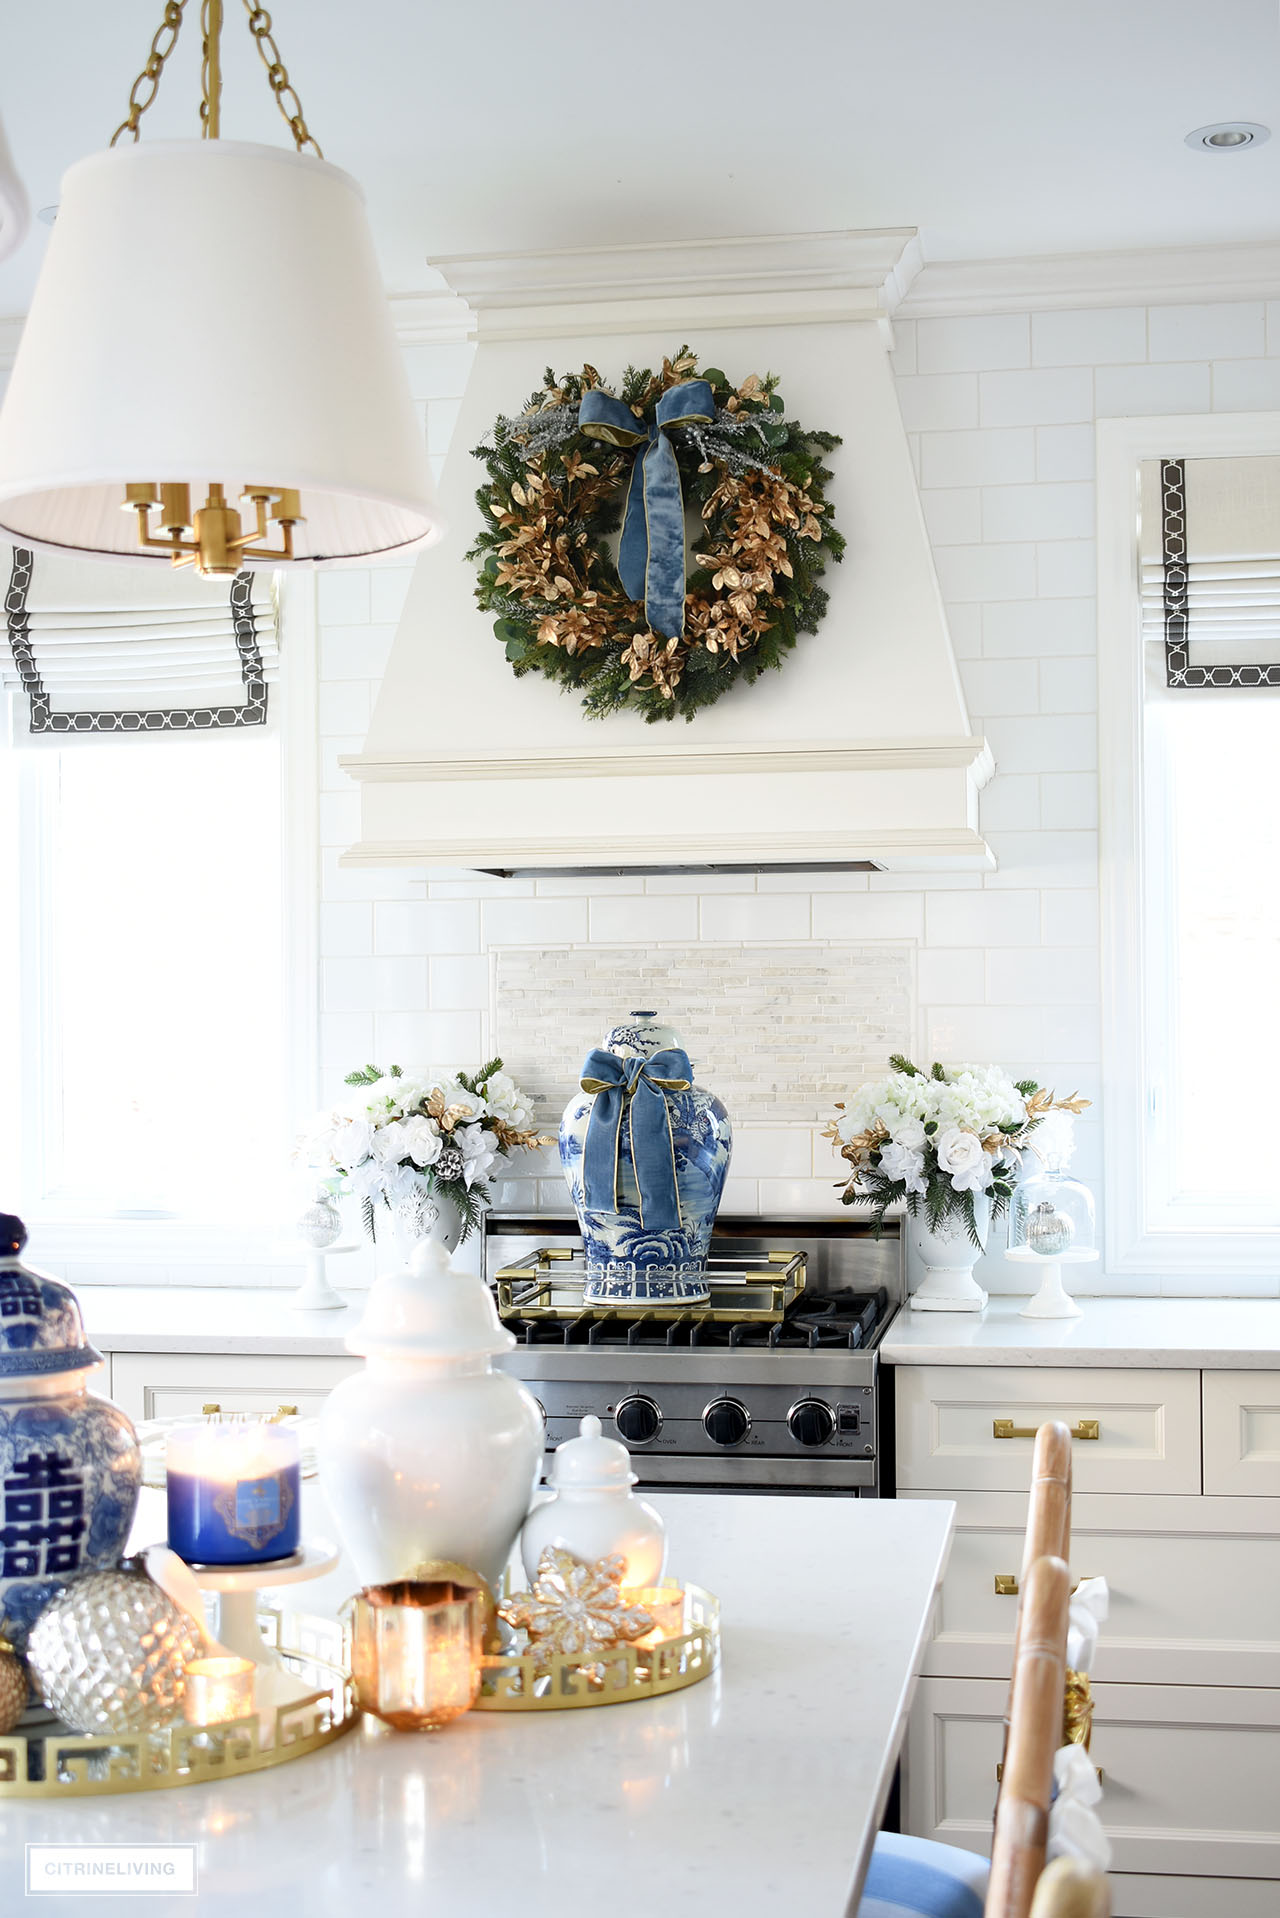 Stunning Christmas kitchen decor styled symmetrically around the stove and range hood, featuring an elegant blue and white ginger jar in the center.